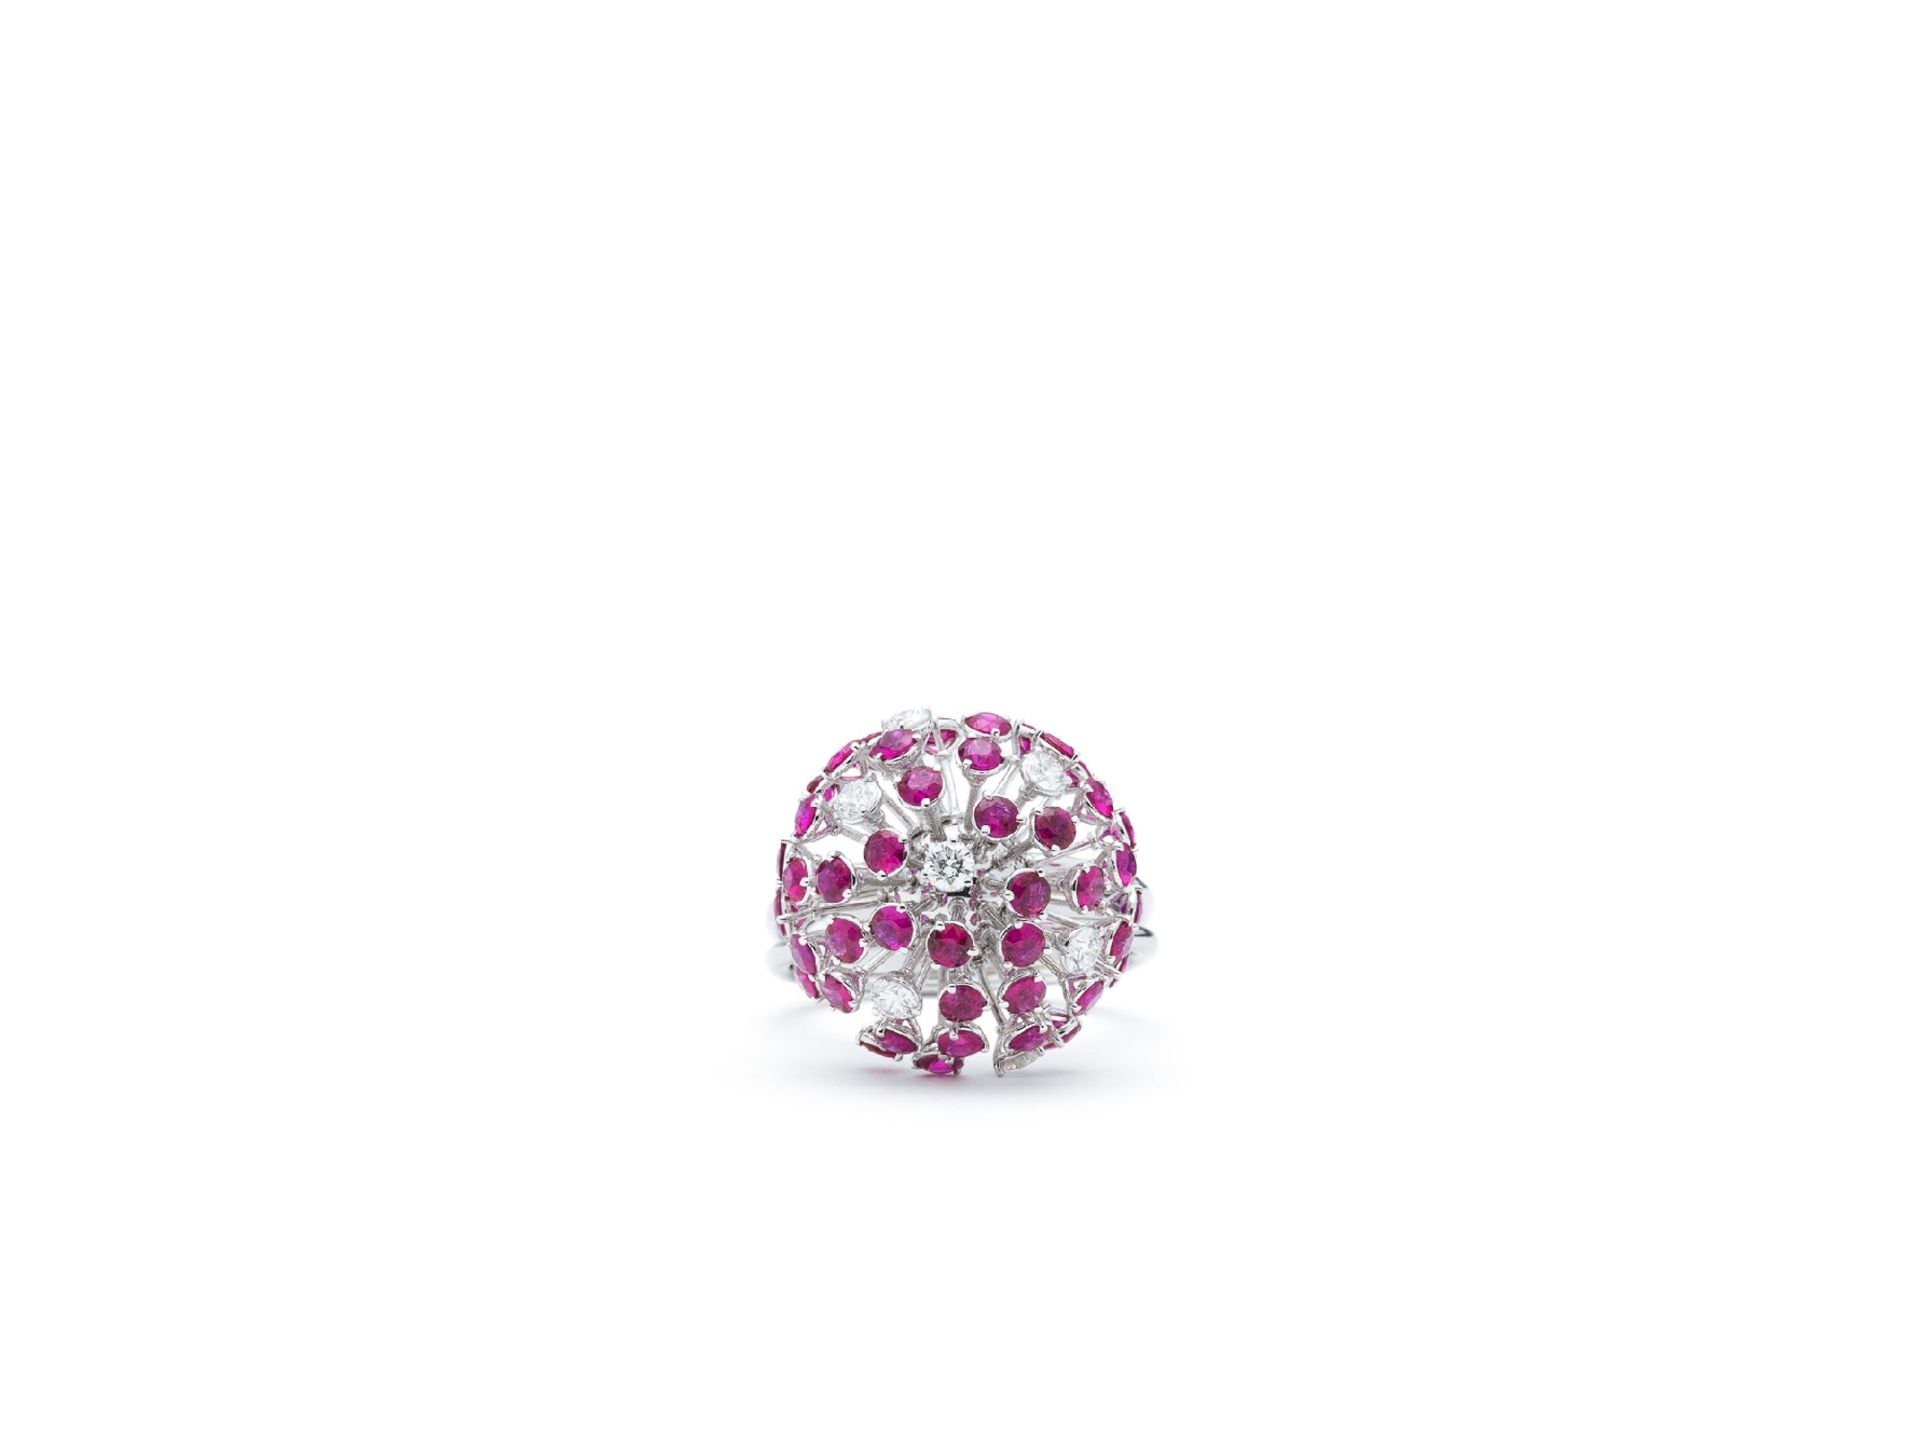 Ring with brilliant diamonds and rubies - Image 5 of 5